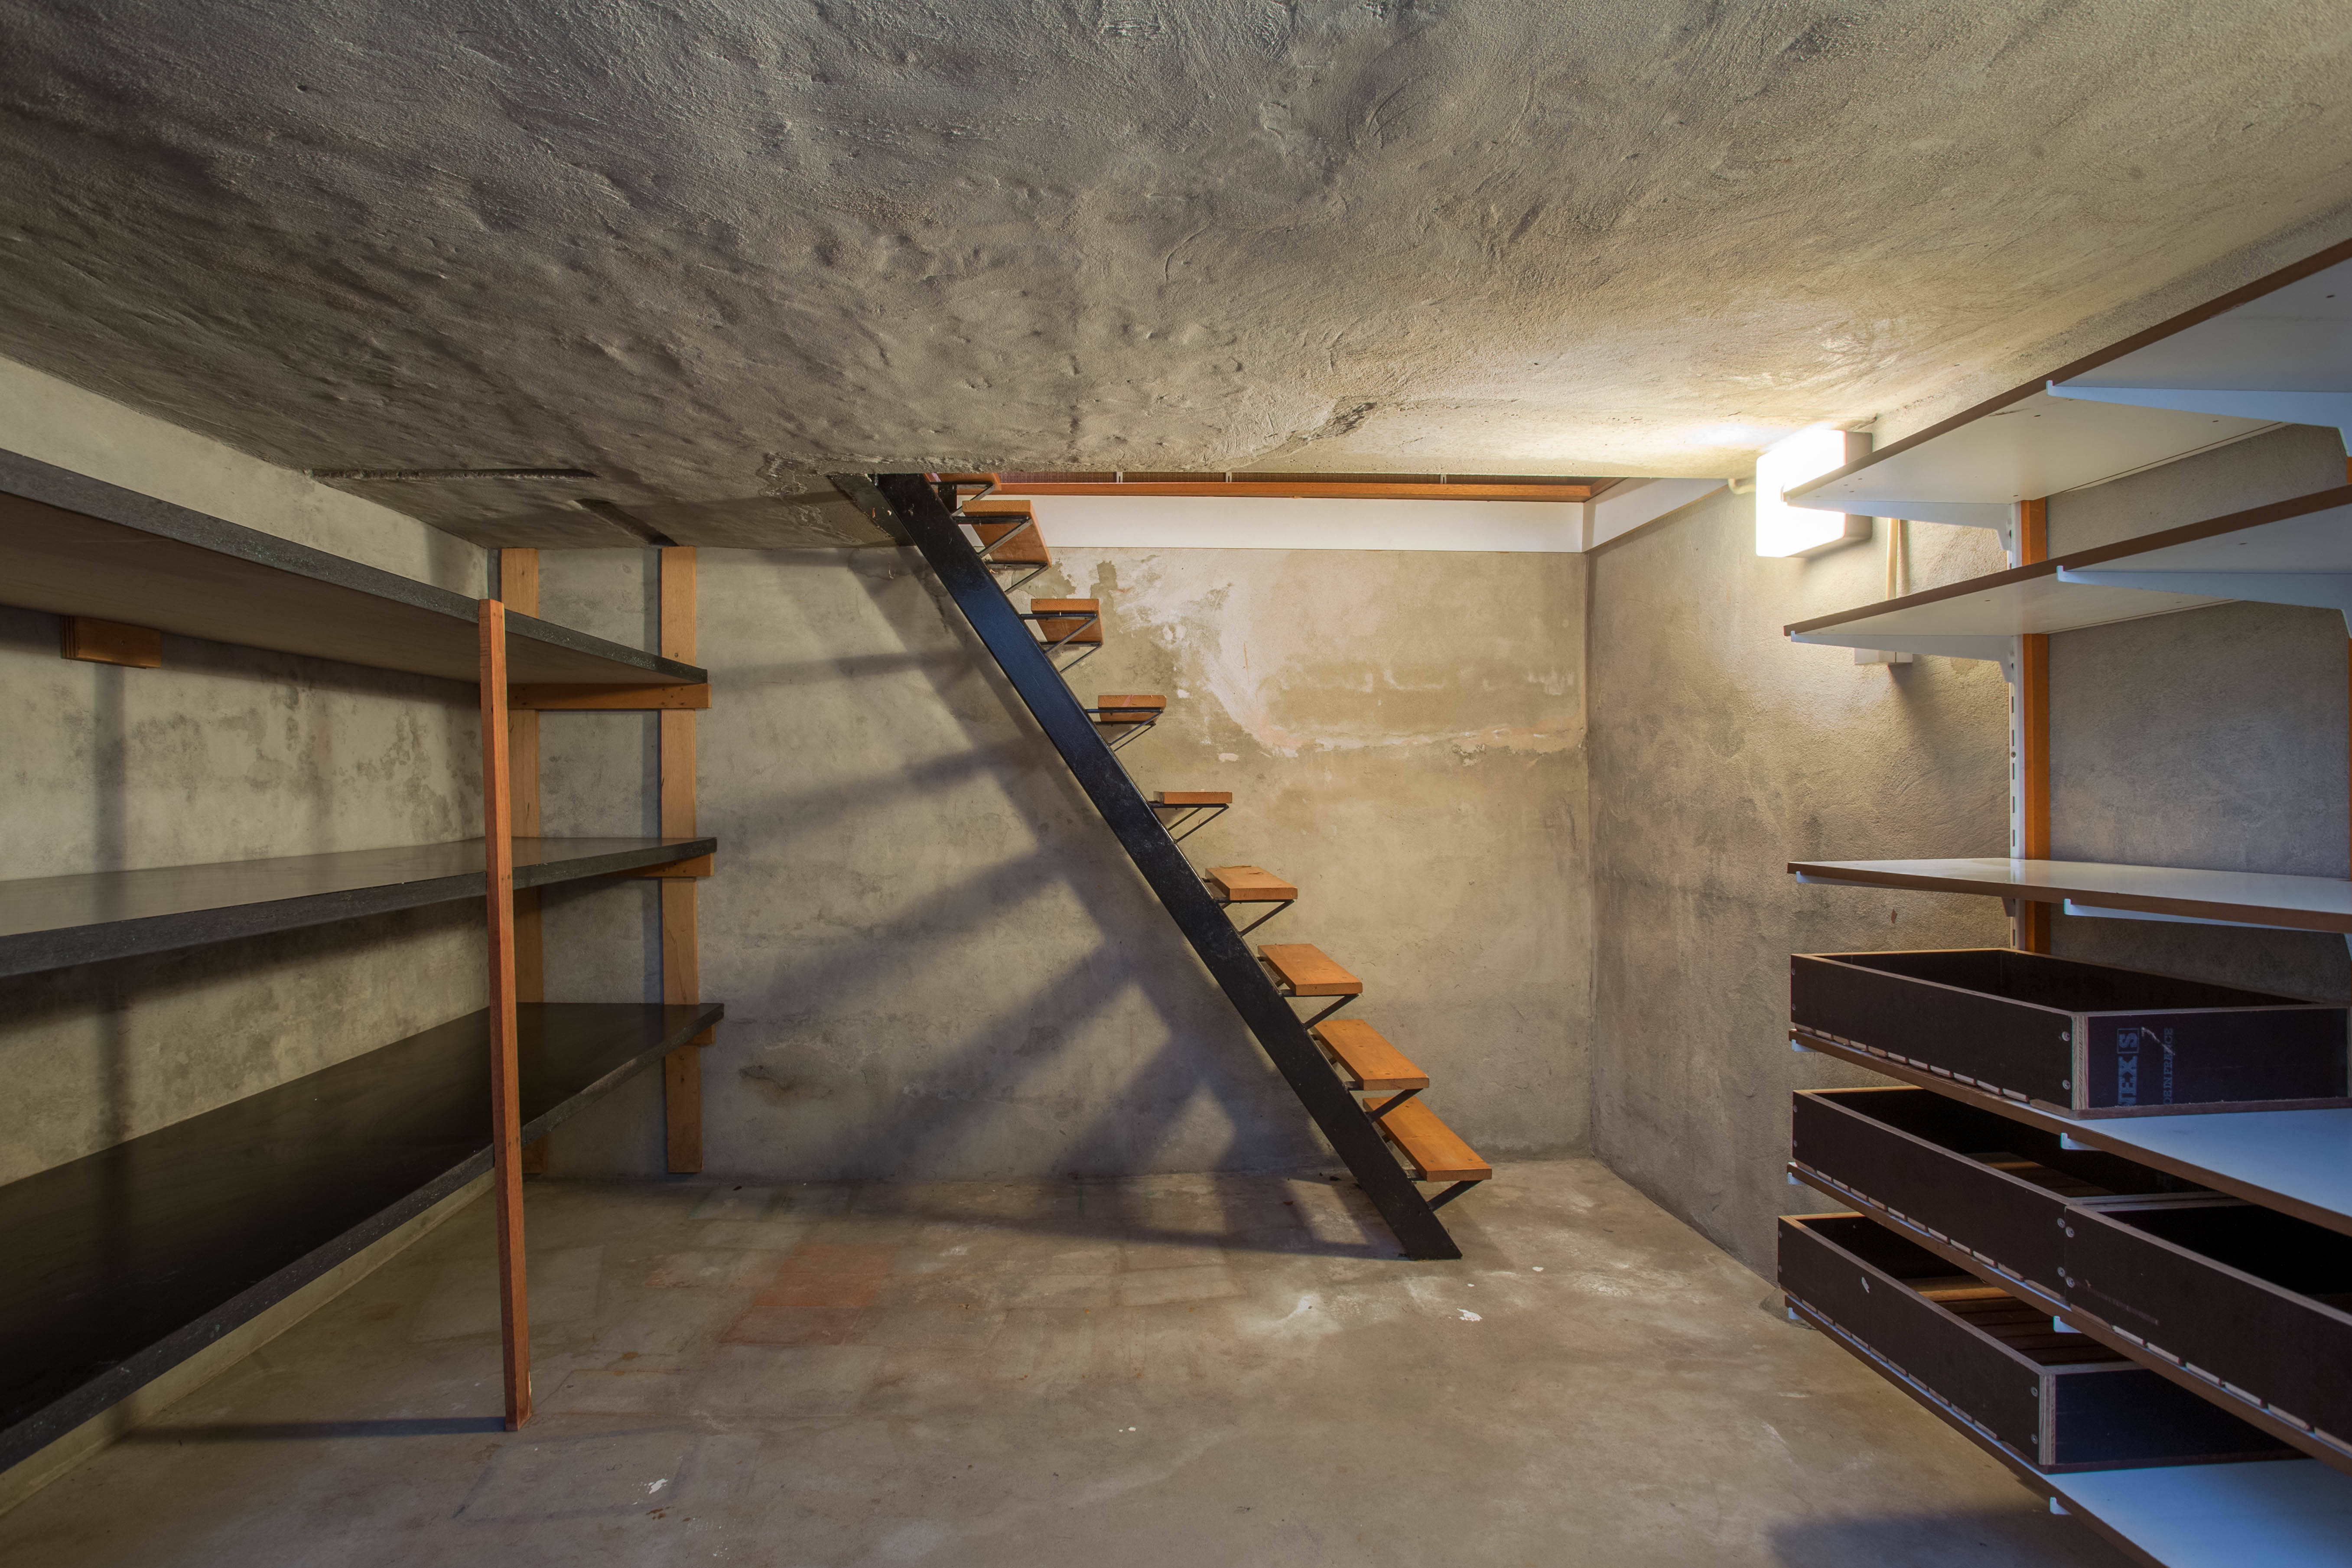 Basement in a building with little light and a wooden stairs. | Source: Shutterstock